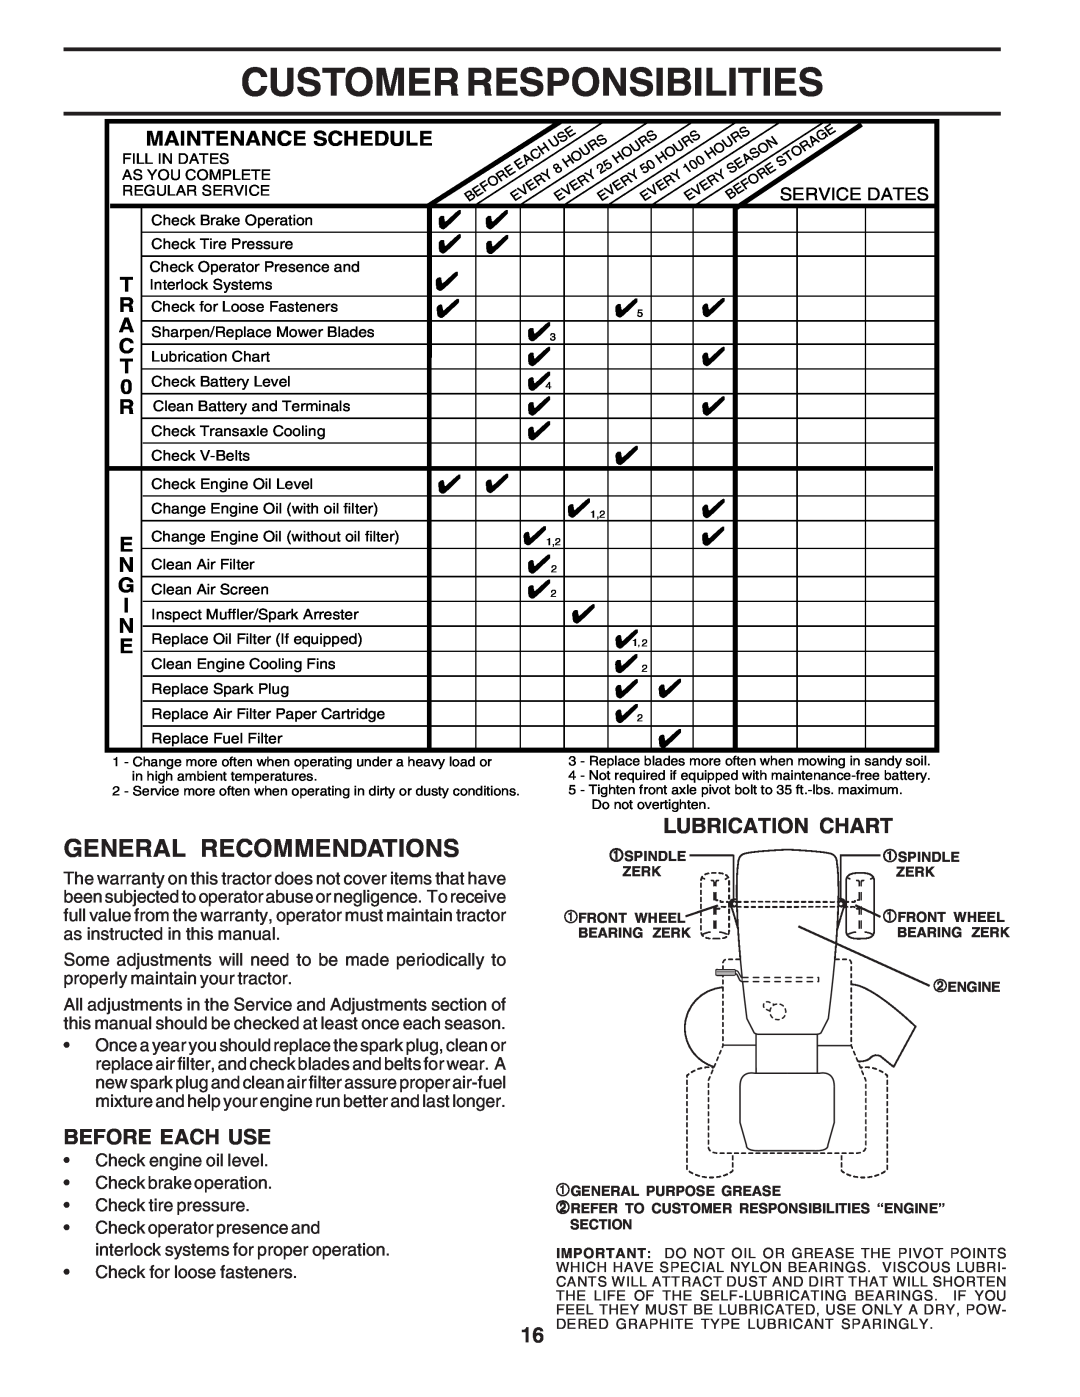 Poulan 183255 owner manual Customer Responsibilities, General Recommendations, Lubrication Chart, Before Each Use 